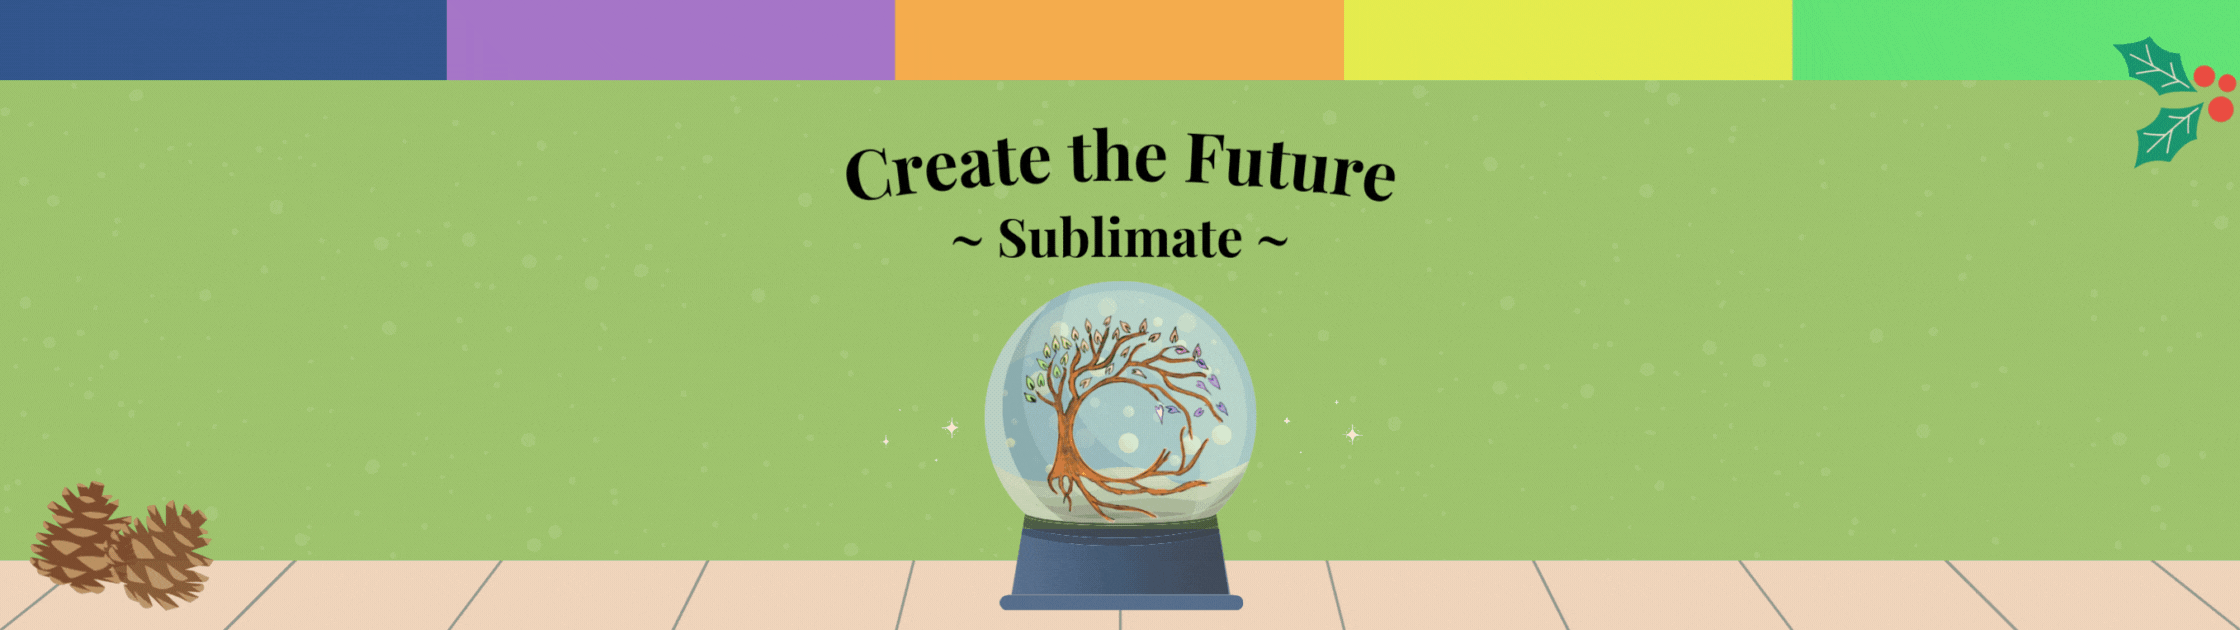 Create the Future logo: a brown illustrated tree. The roots curve from the right, up to the trunk on the left, with the branches bending back to the right to form a 'C' shape. The leaves are calming rainbow pastel colours. 